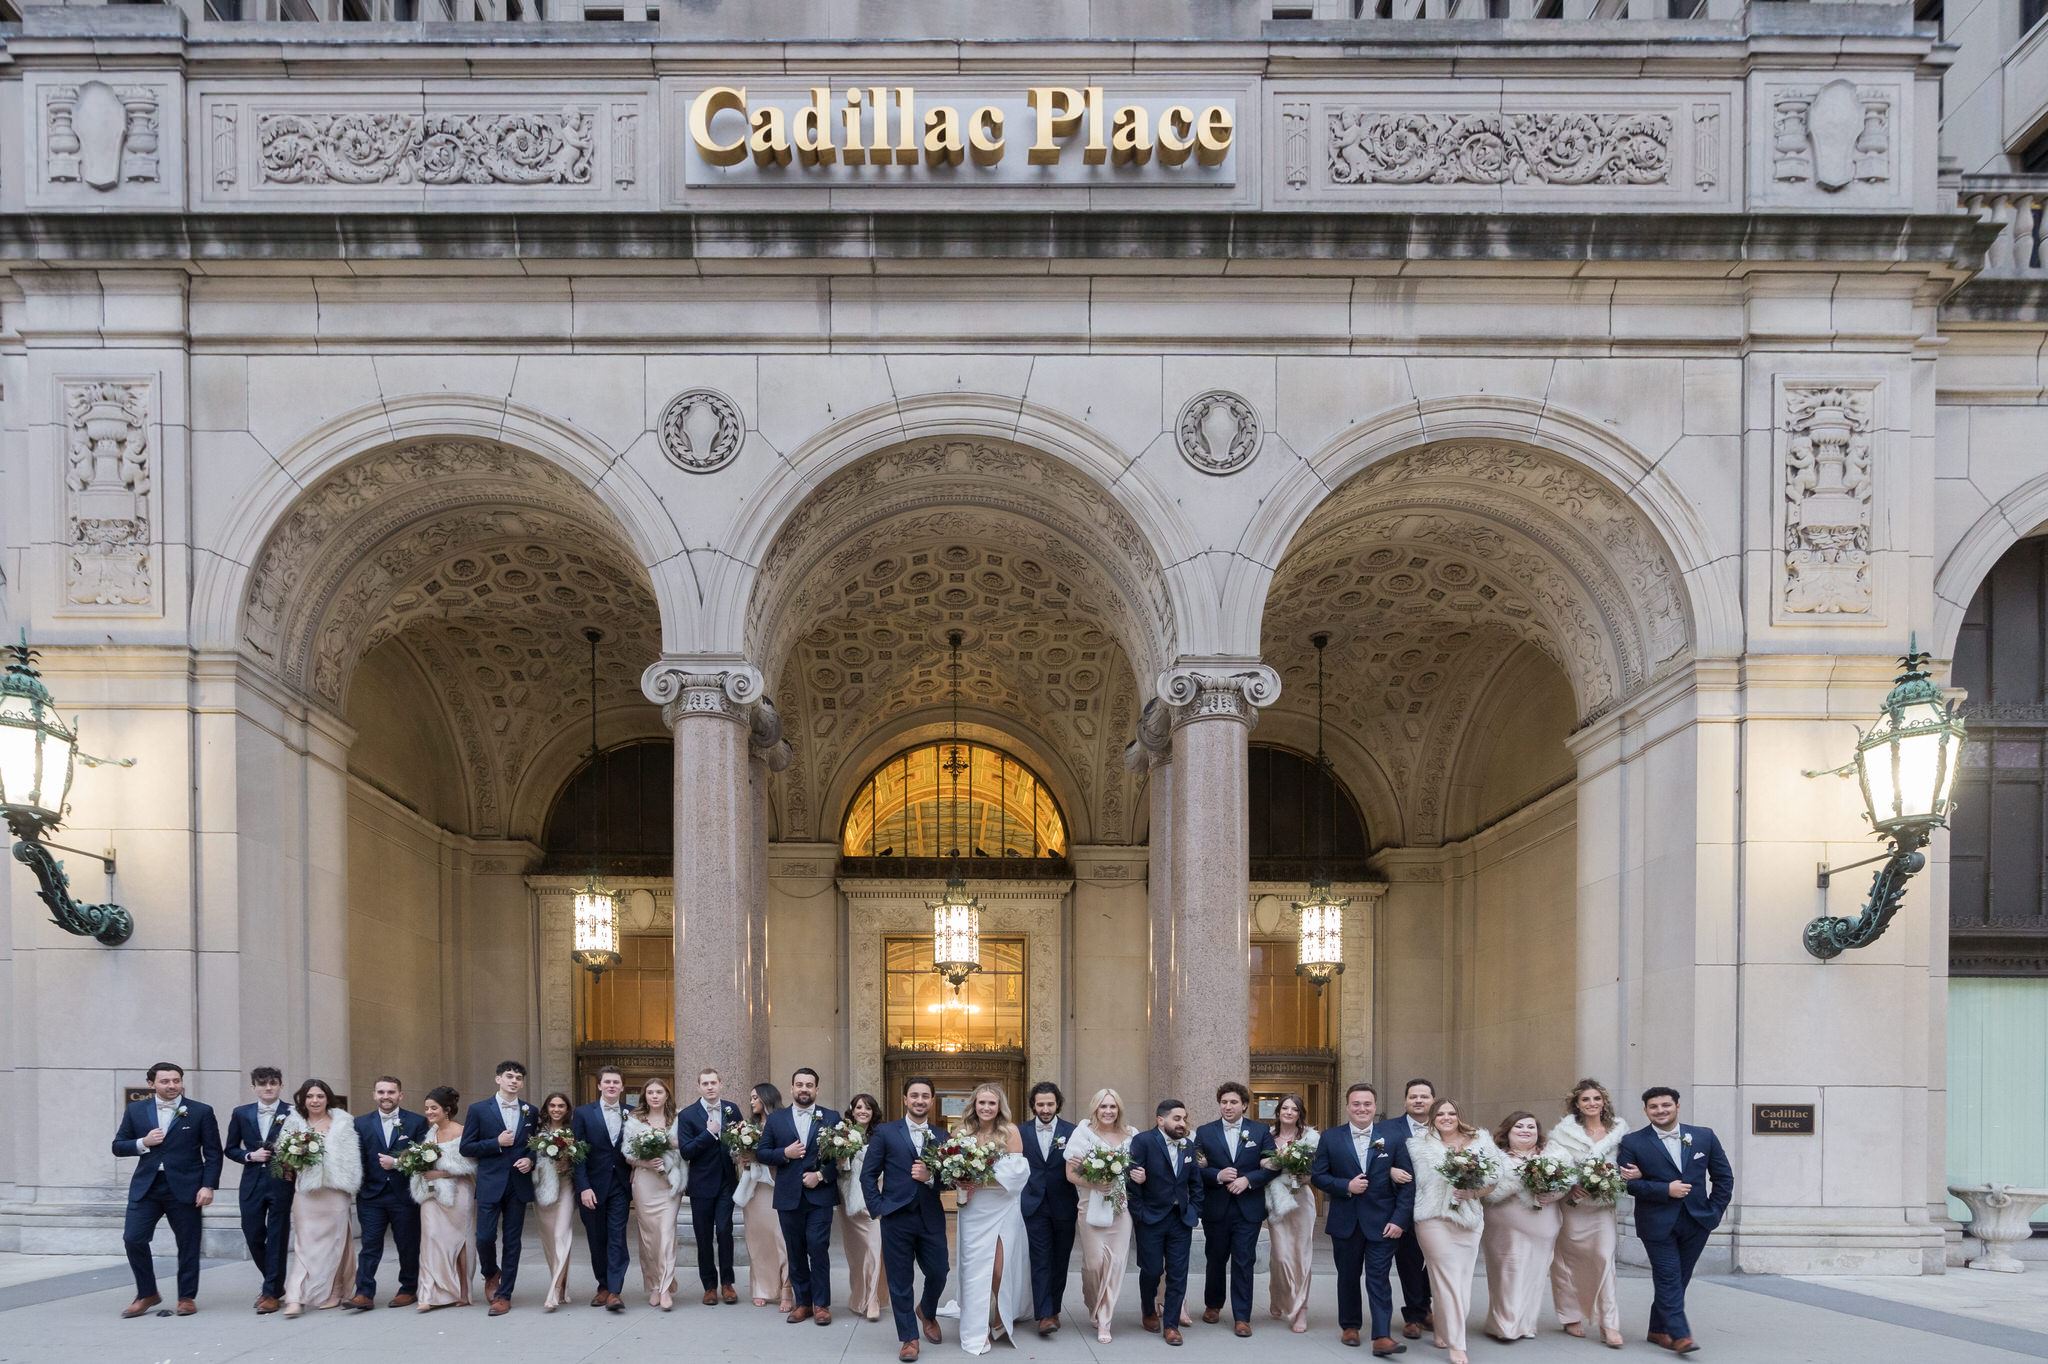 A large bridal party poses in front of Cadillac Place in Detroit, MI.